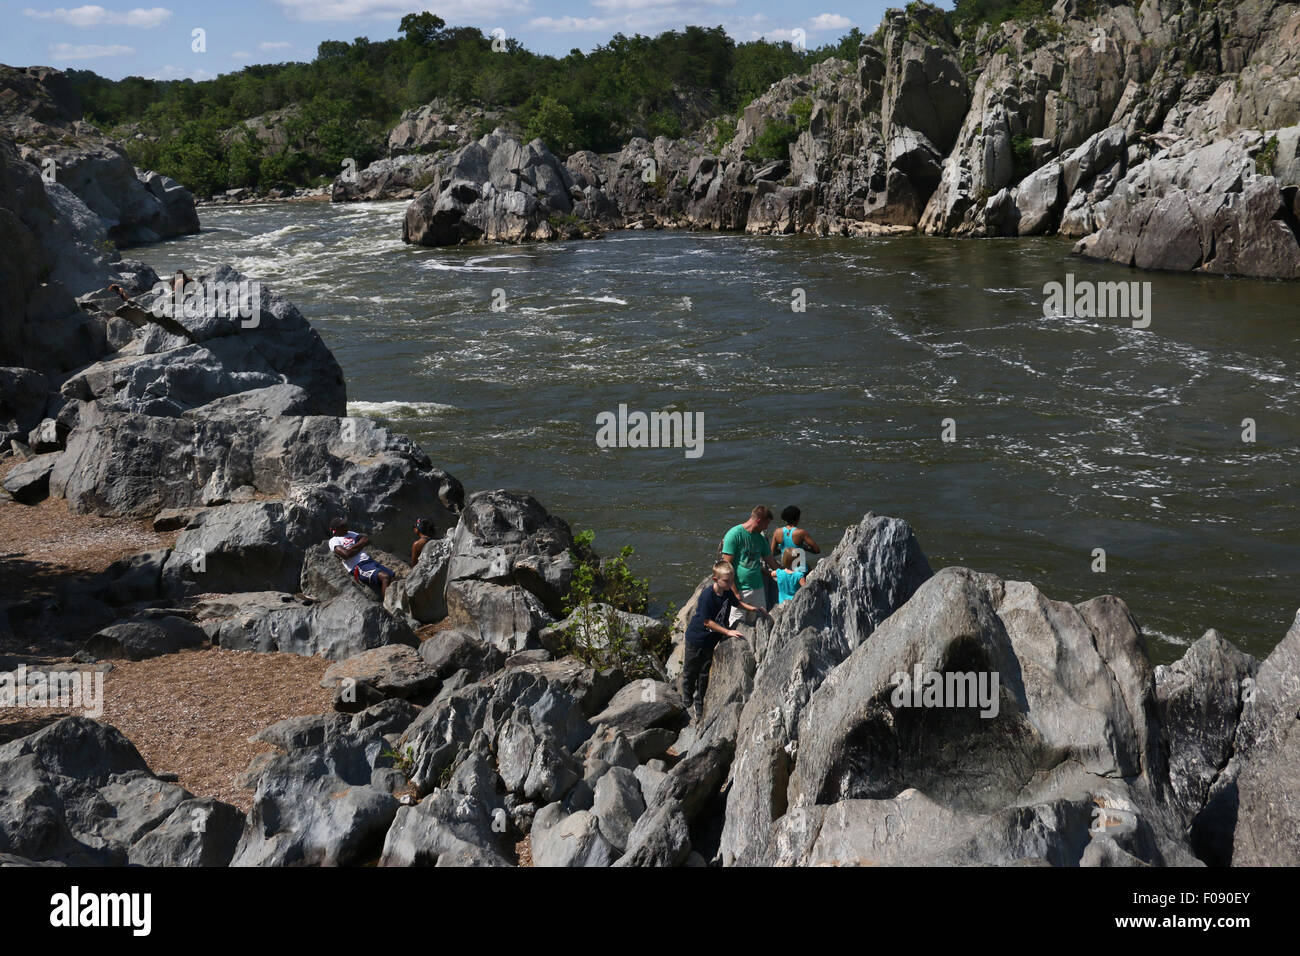 Hikers on rocks at the Great Falls of the Potomac River Maryland Stock Photo